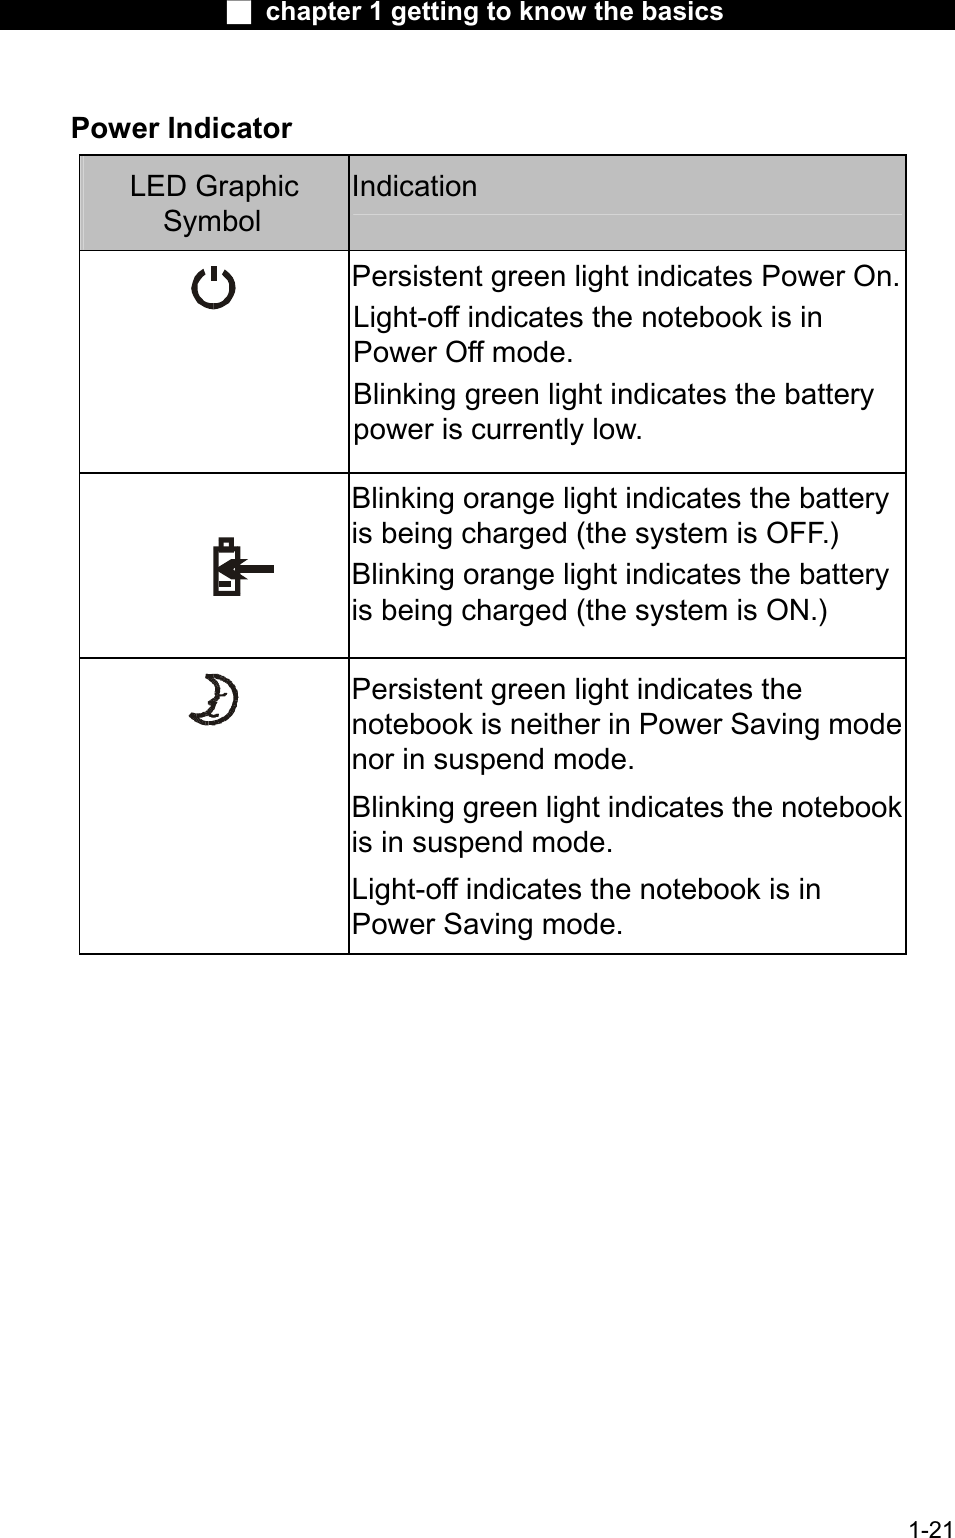 Ϯ chapter 1 getting to know the basicsPower IndicatorLED GraphicSymbolIndicationPersistent green light indicates Power On.Light-off indicates the notebook is in Power Off mode. Blinking green light indicates the batterypower is currently low.Blinking orange light indicates the battery is being charged (the system is OFF.)Blinking orange light indicates the battery is being charged (the system is ON.)Persistent green light indicates the notebook is neither in Power Saving modenor in suspend mode. Blinking green light indicates the notebookis in suspend mode.Light-off indicates the notebook is in Power Saving mode. 1-21